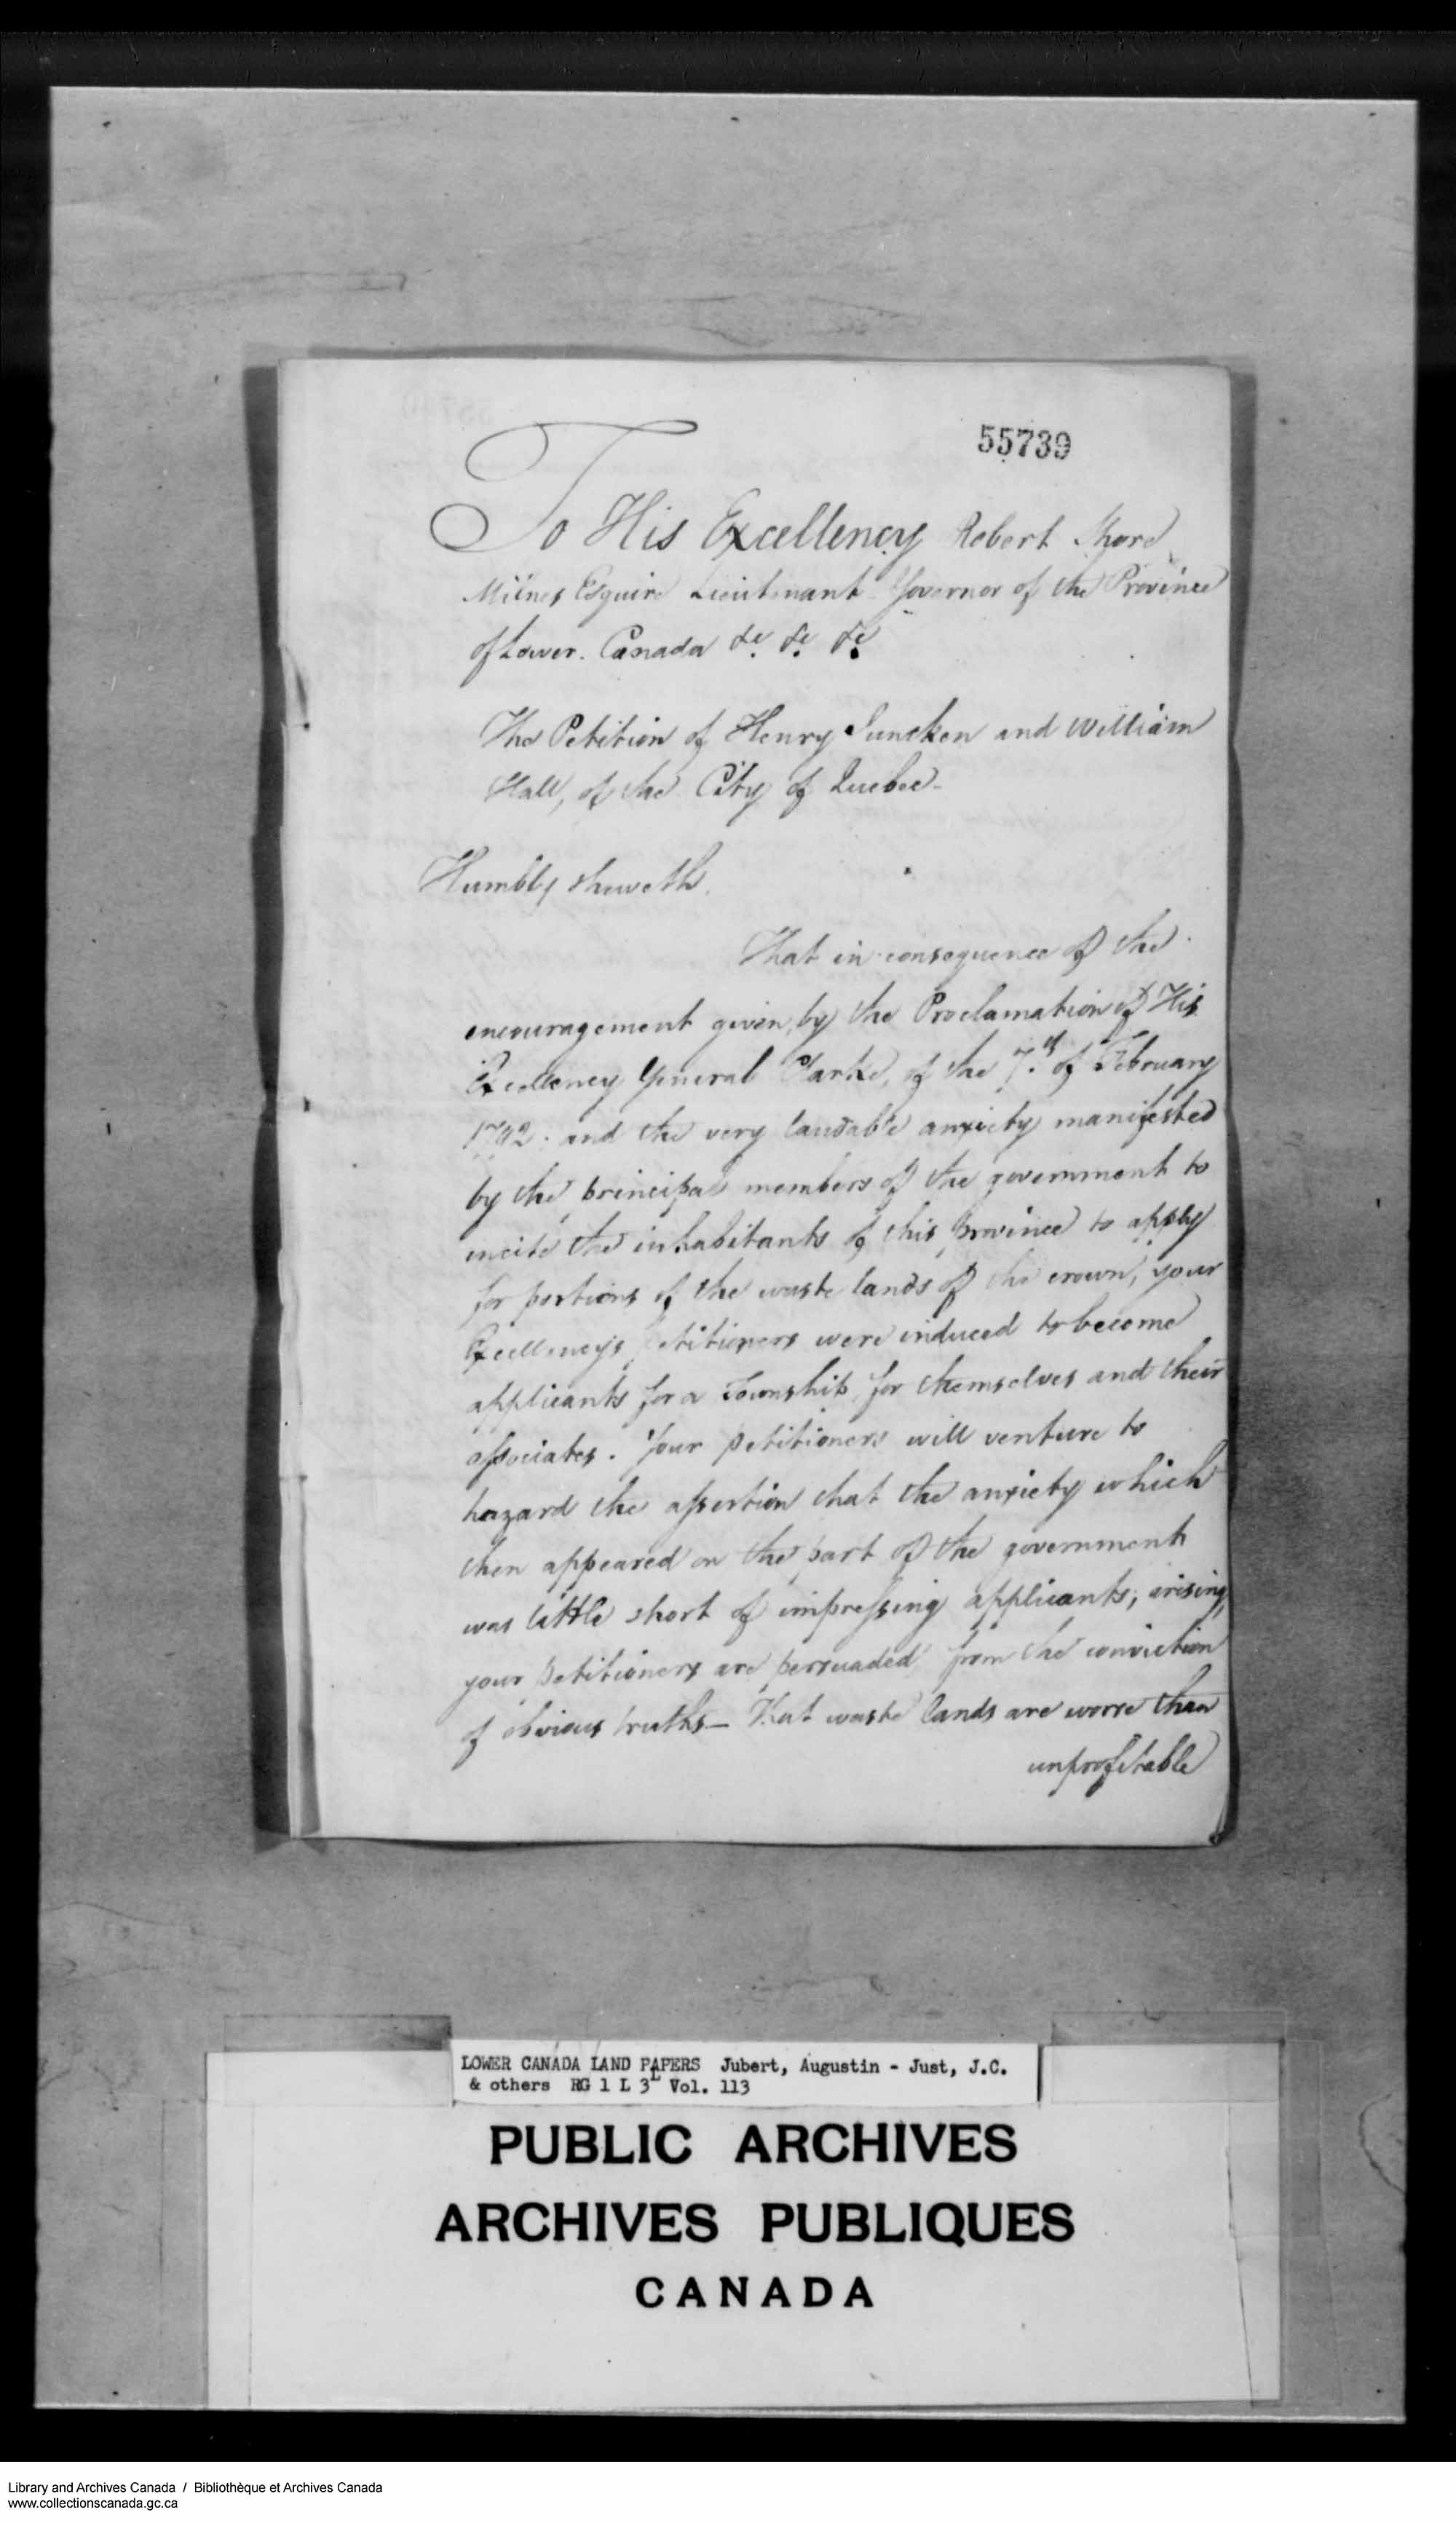 Digitized page of  for Image No.: e008700227